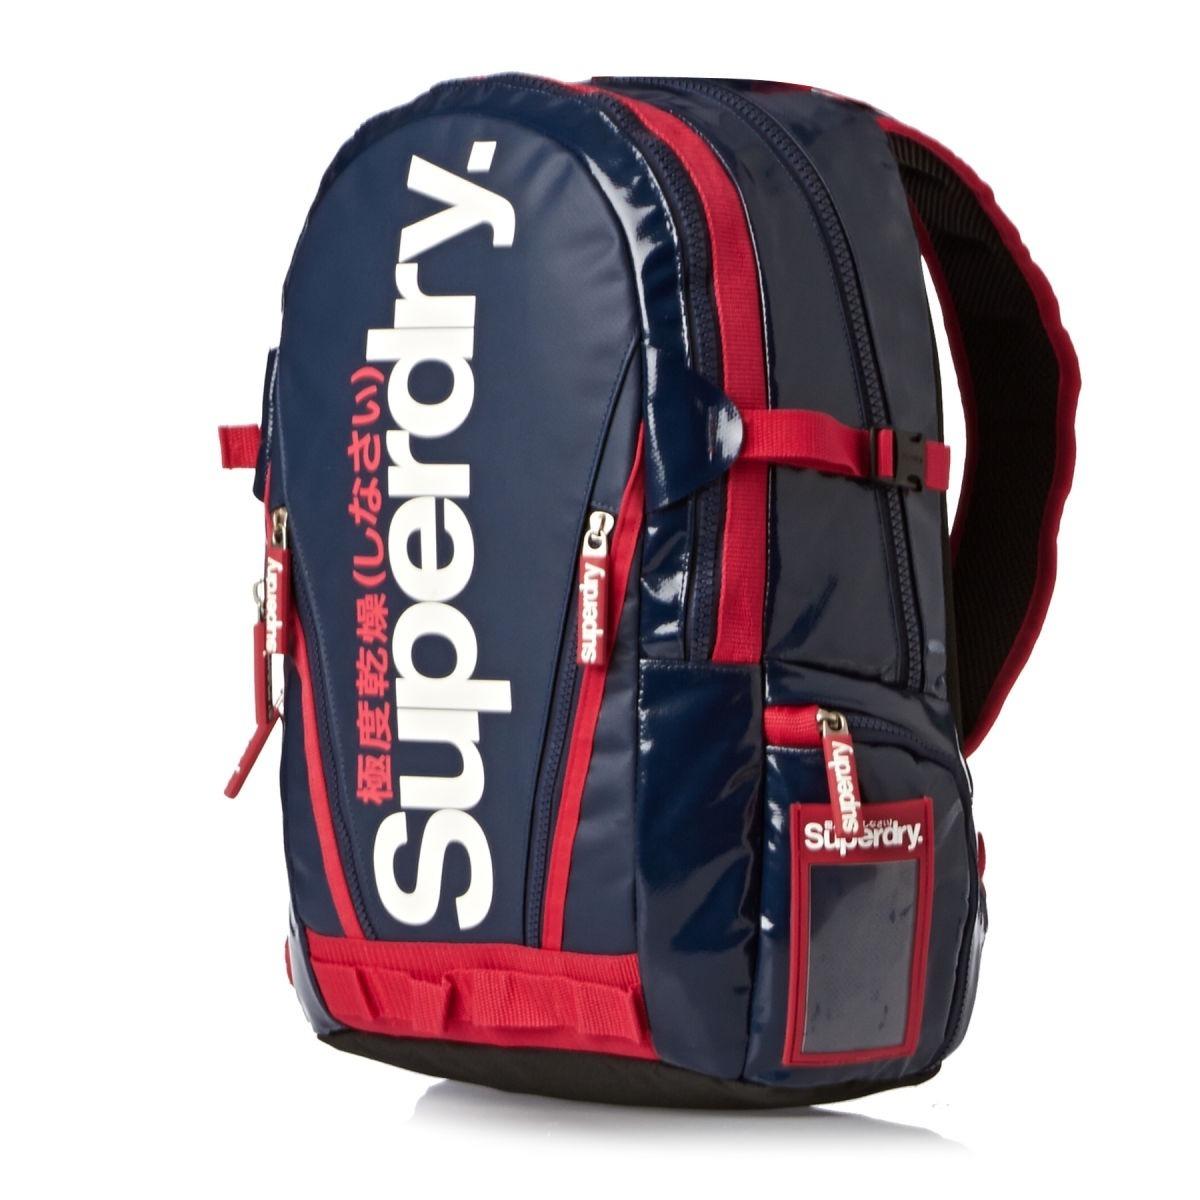 Superdry Philippines: Superdry price list - Watches & Accessories for ...